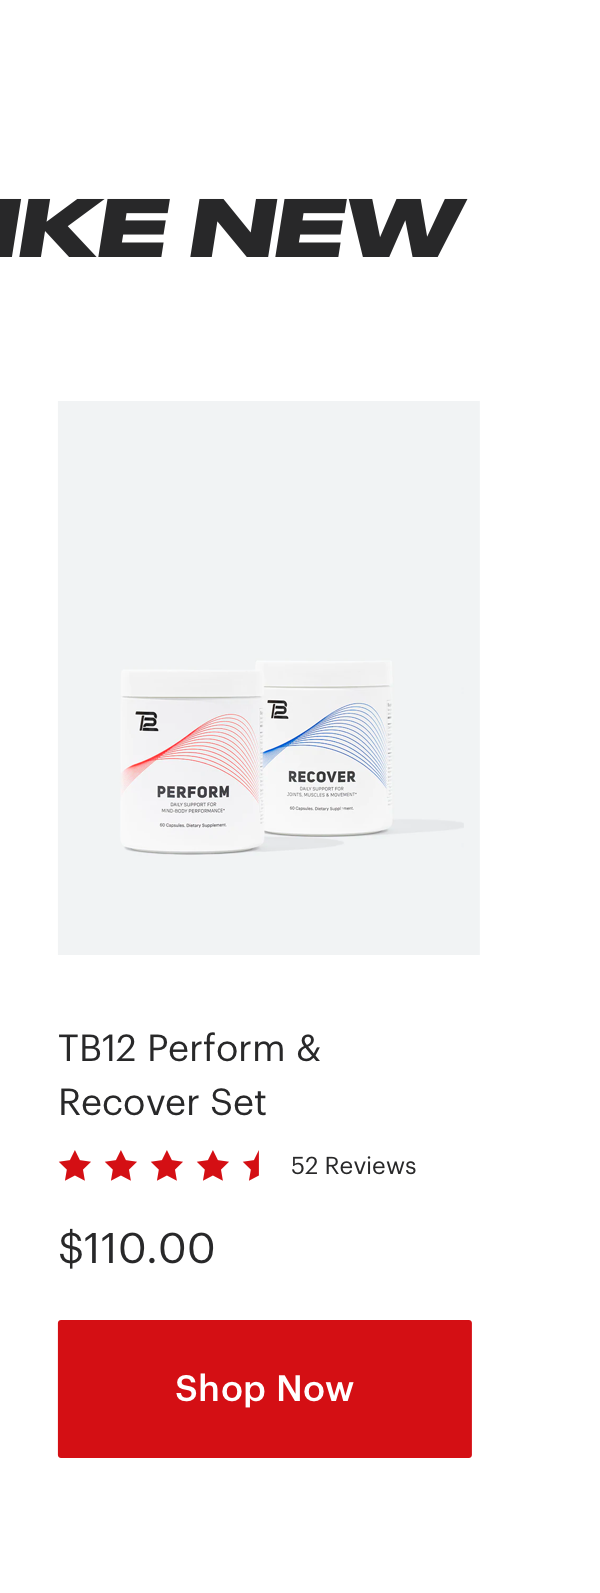 TB12 Perform & Recover 